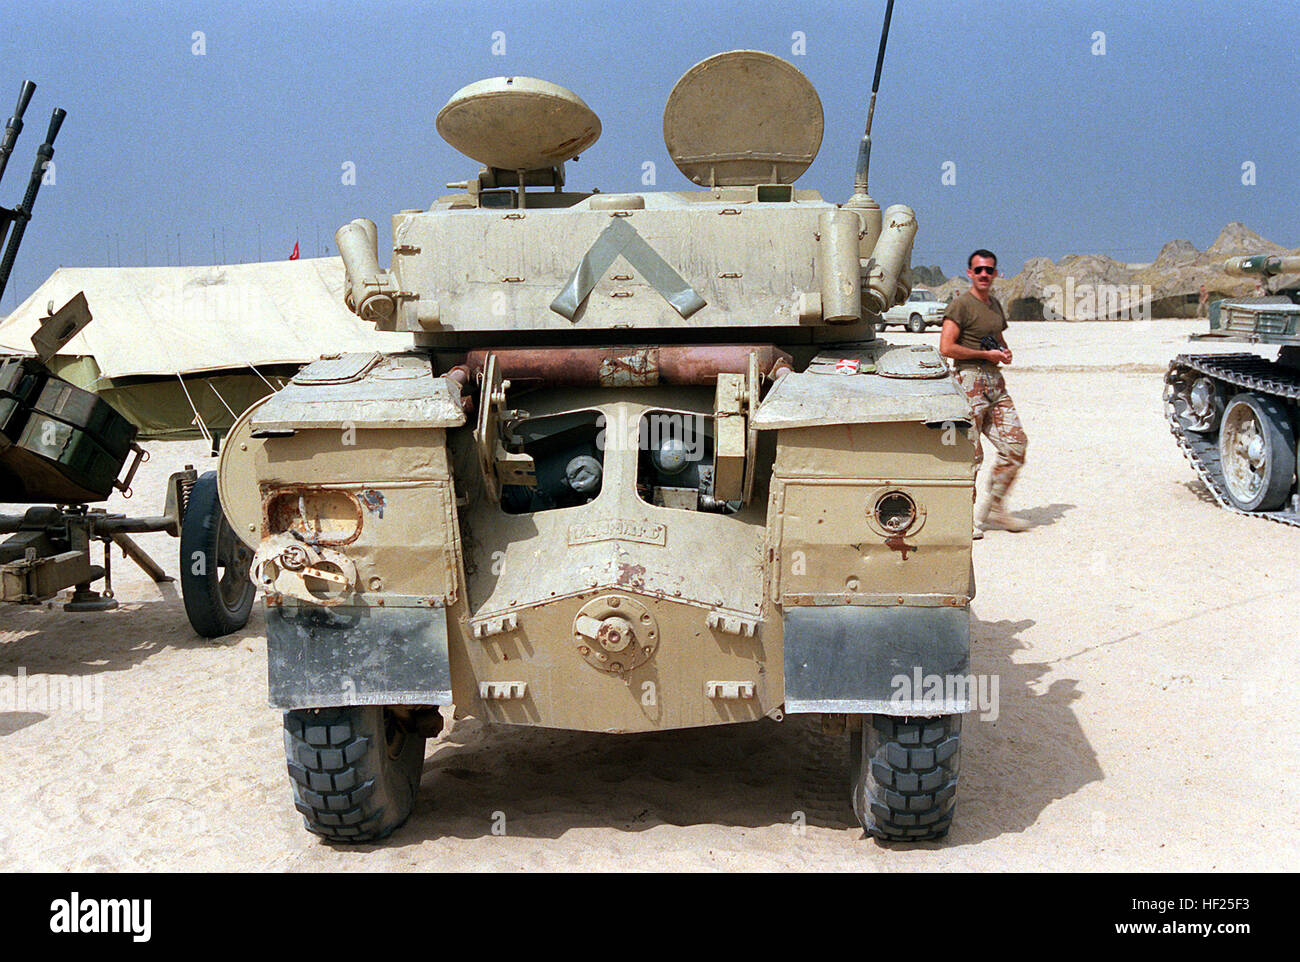 A rear view of an Iraqi AML-90 light armored car that was captured during  Operation Desert Storm. An inverted "V" marking like those used on  coalition vehicles has been placed on the